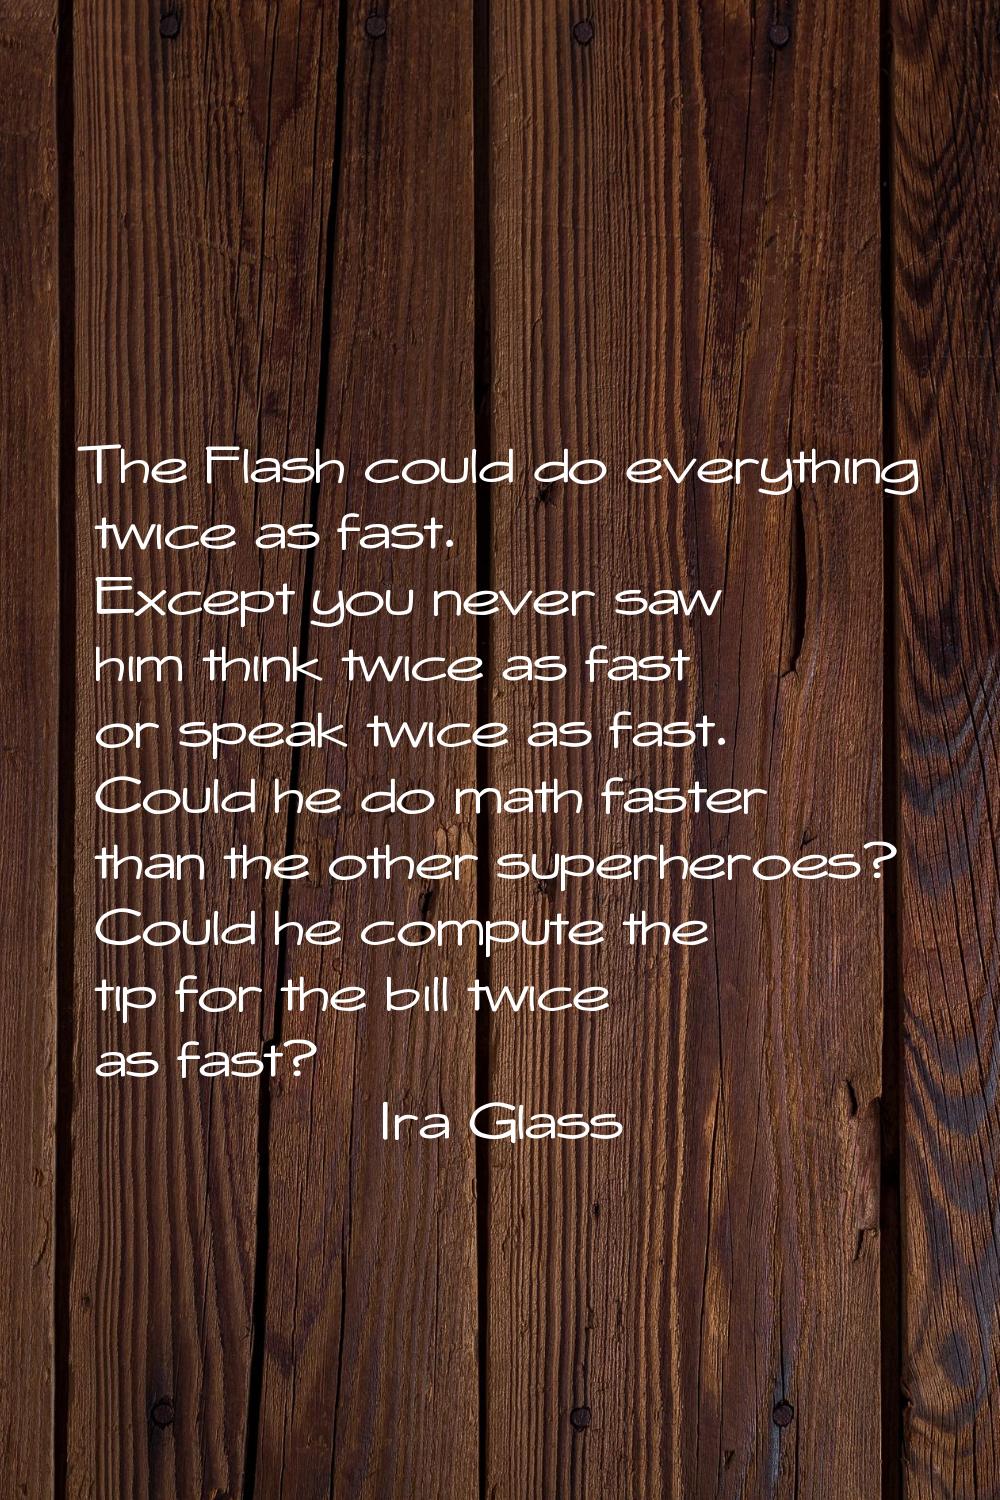 The Flash could do everything twice as fast. Except you never saw him think twice as fast or speak 